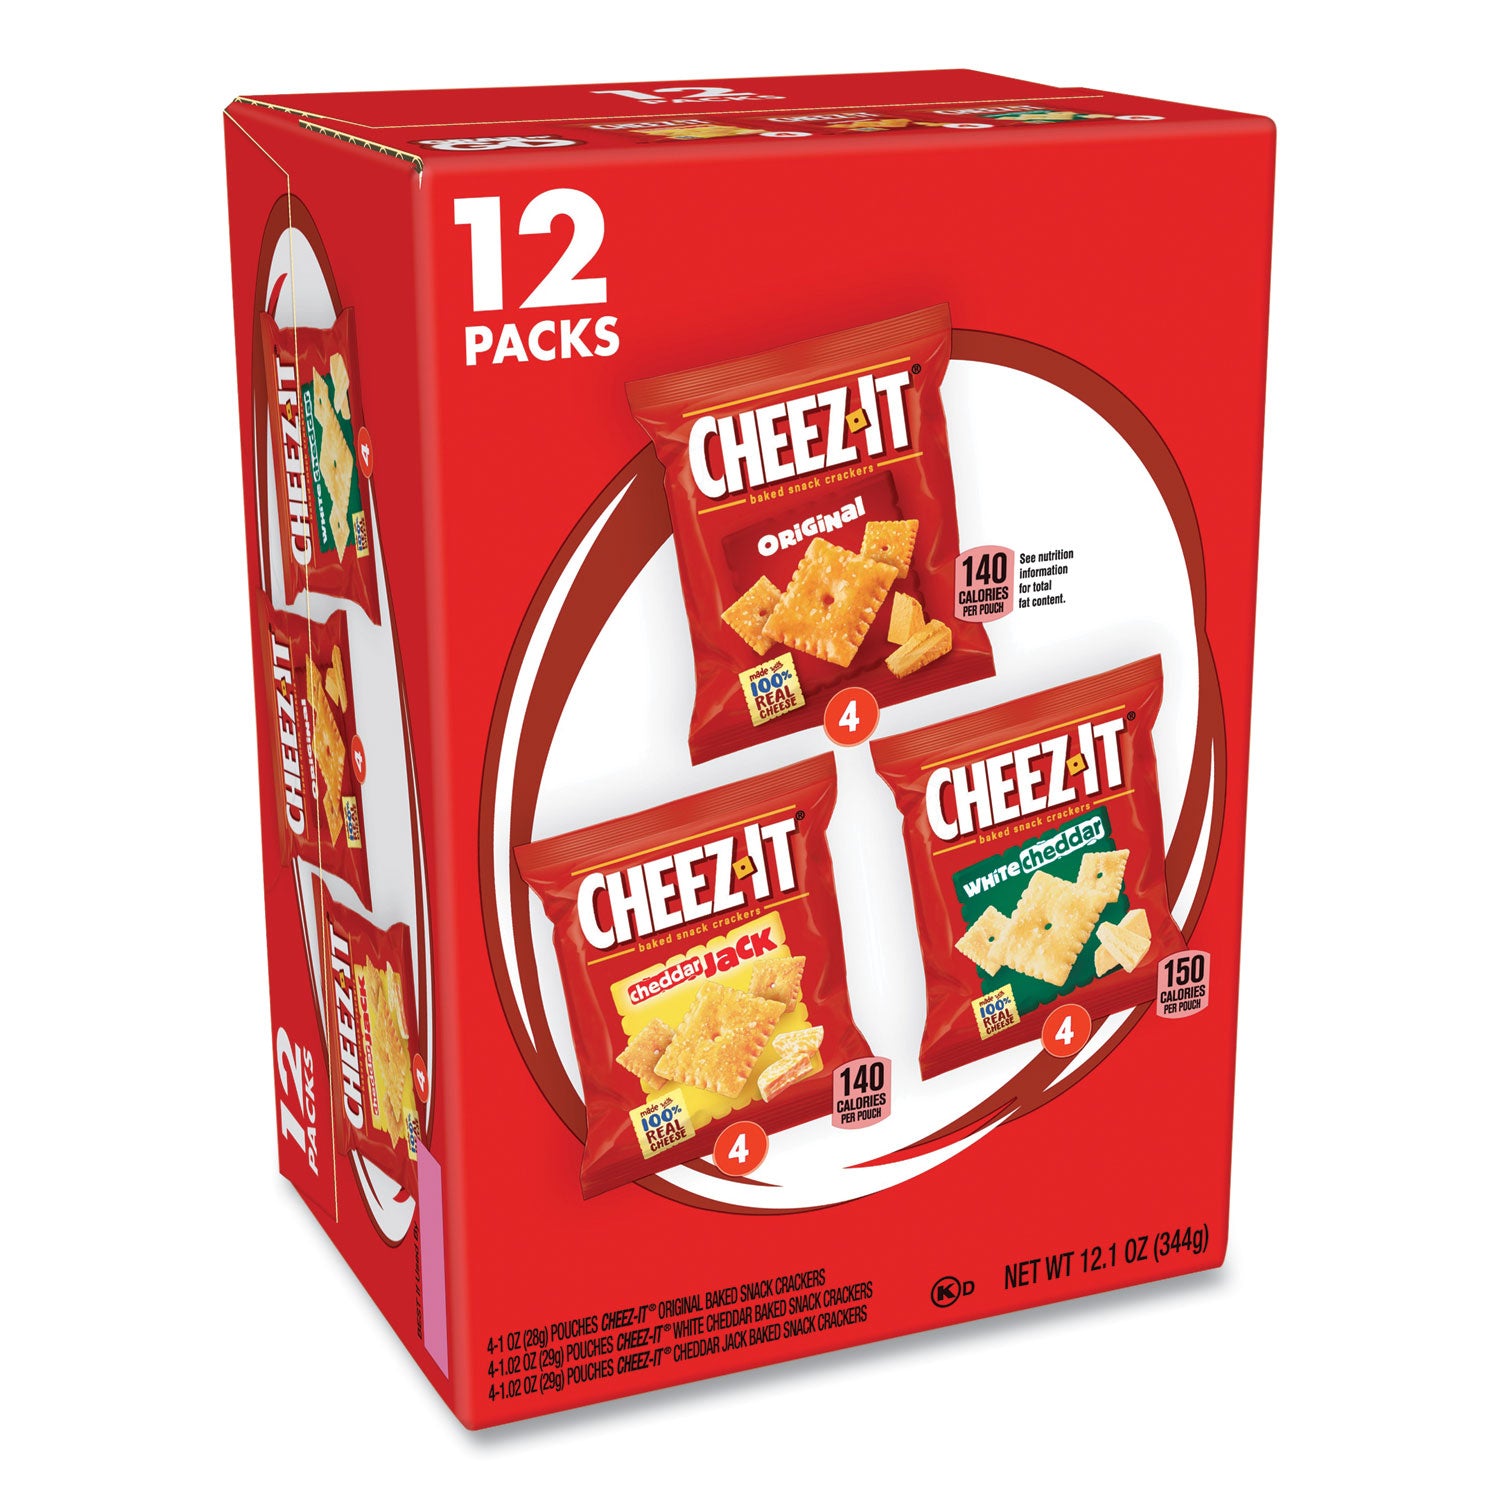 baked-snack-crackers-variety-pack-assorted-flavors-8-075-oz-and-37-15-oz-bags-box-ships-in-1-3-business-days_grr70000122 - 1